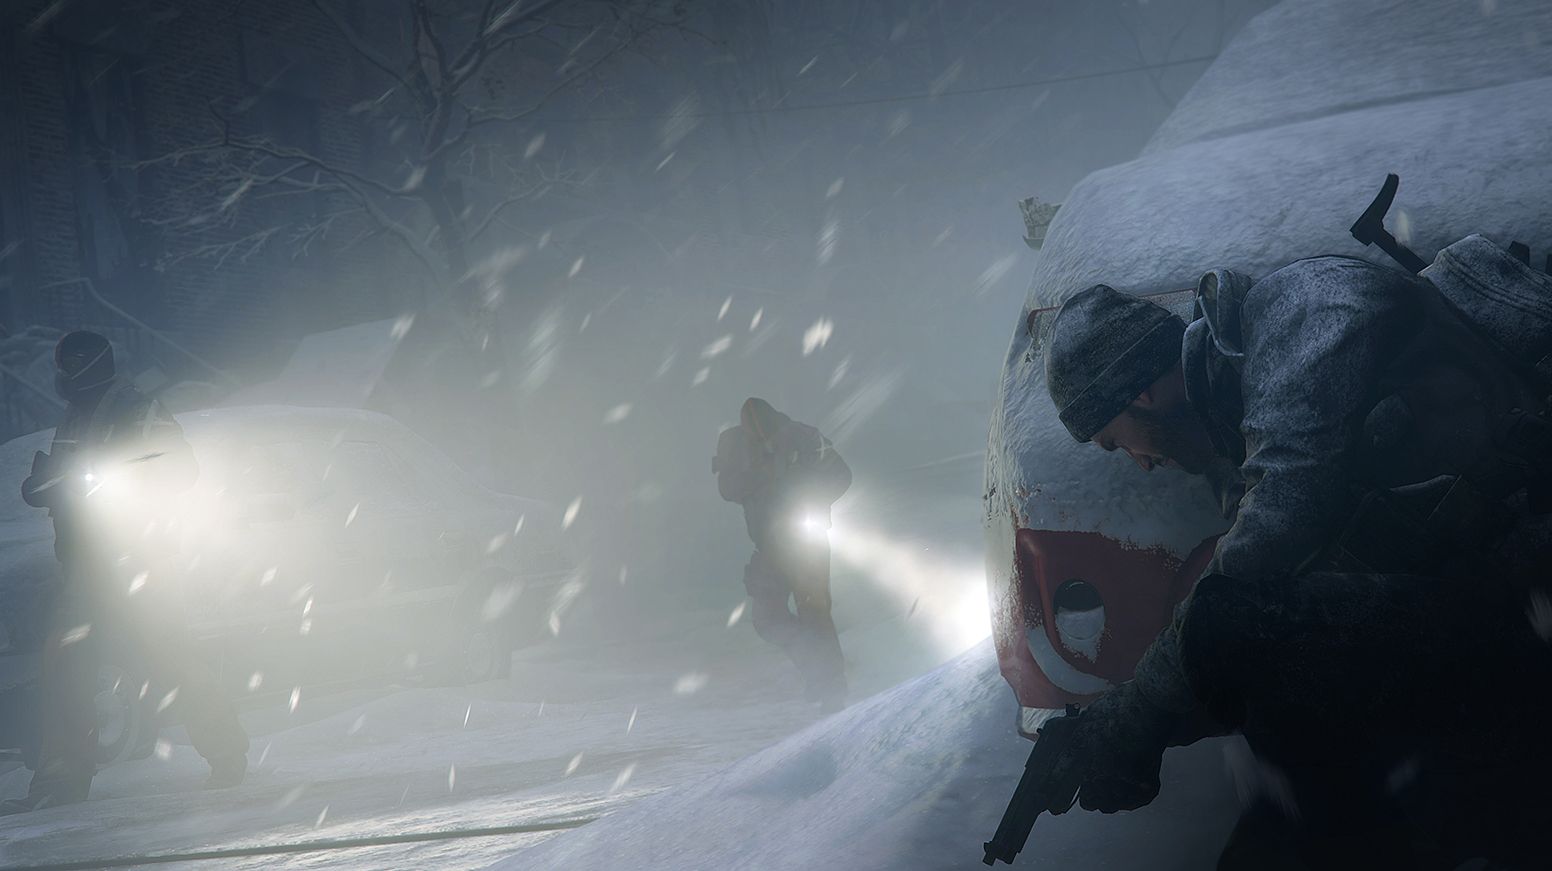 A snow scene from Tom Clancy's The Division